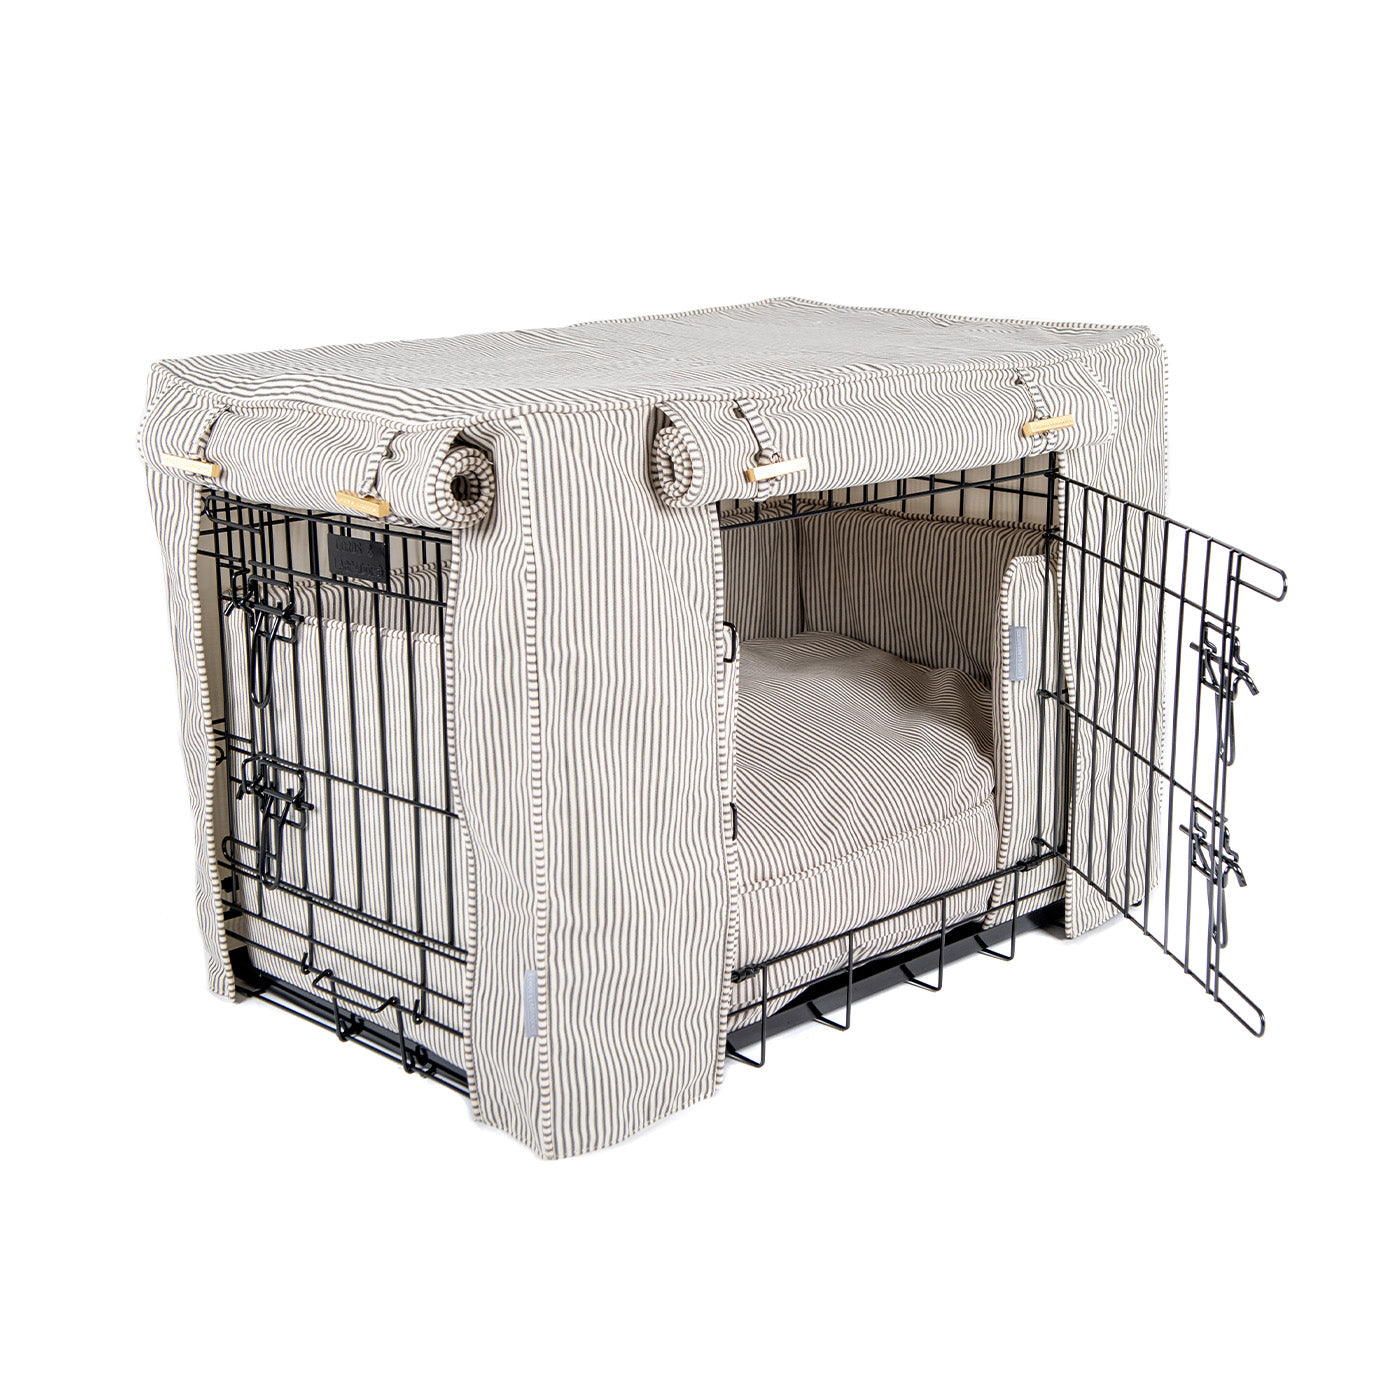 Luxury Black Dog Cage Set With Cushion, Bumper and Cage Cover, In Regency Stripe Oil Cloth. The Perfect Dog Cage For The Ultimate Naptime, Available Now at Lords & Labradors US